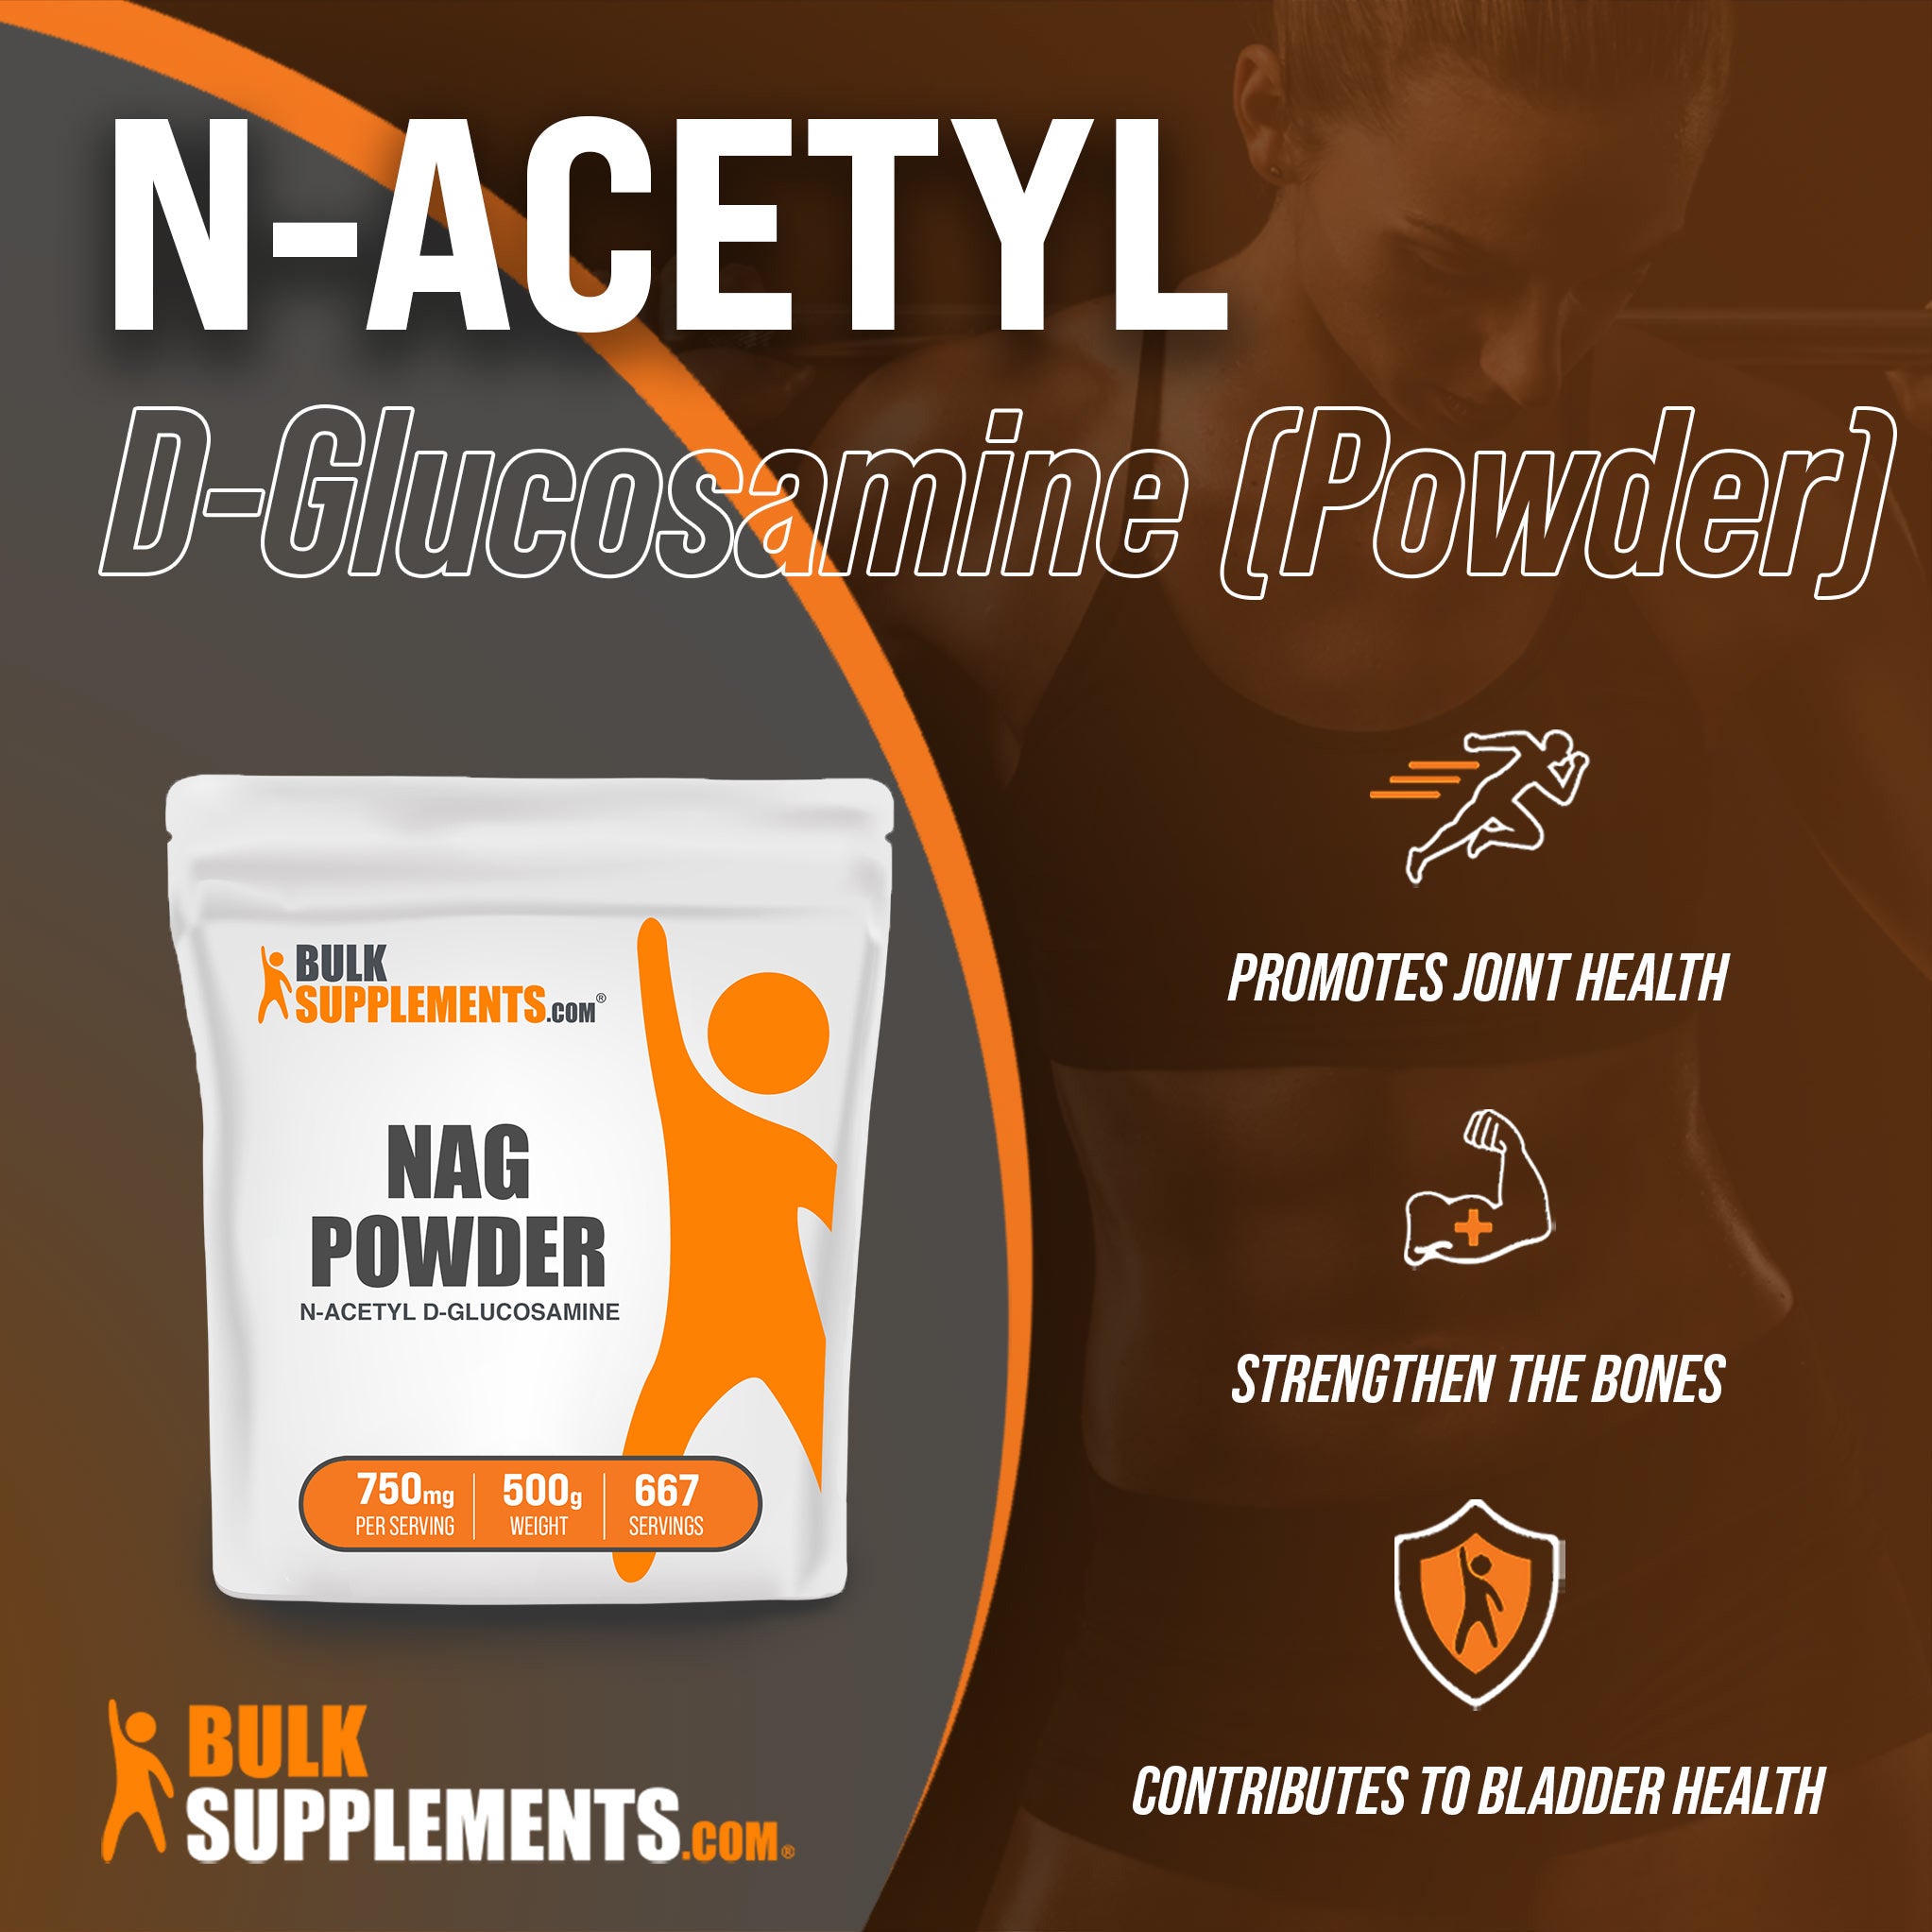 Benefits of N-Acetyl D-Glucosamine: promotes joint health, strengthen the bones, contributes to bladder health